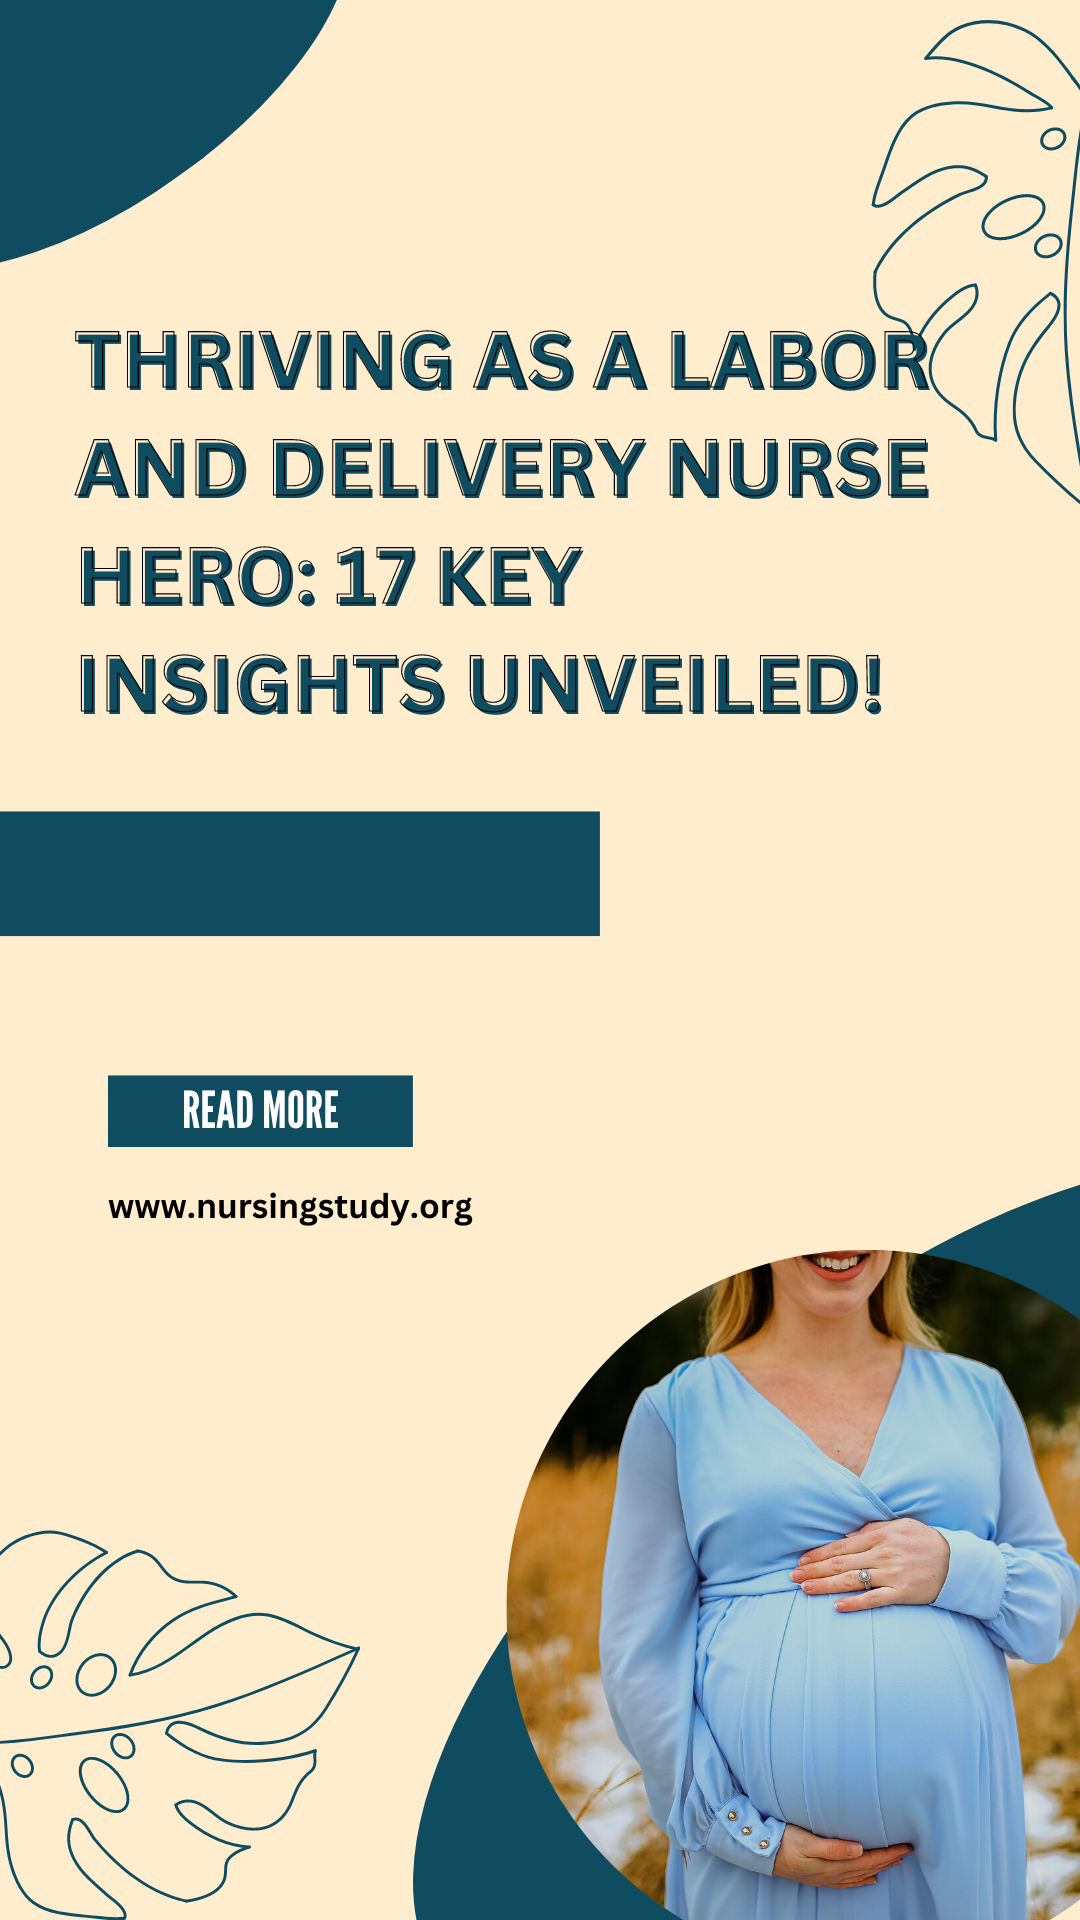 Thriving as a Labor and Delivery Nurse Hero: 17 Key Insights Unveiled!